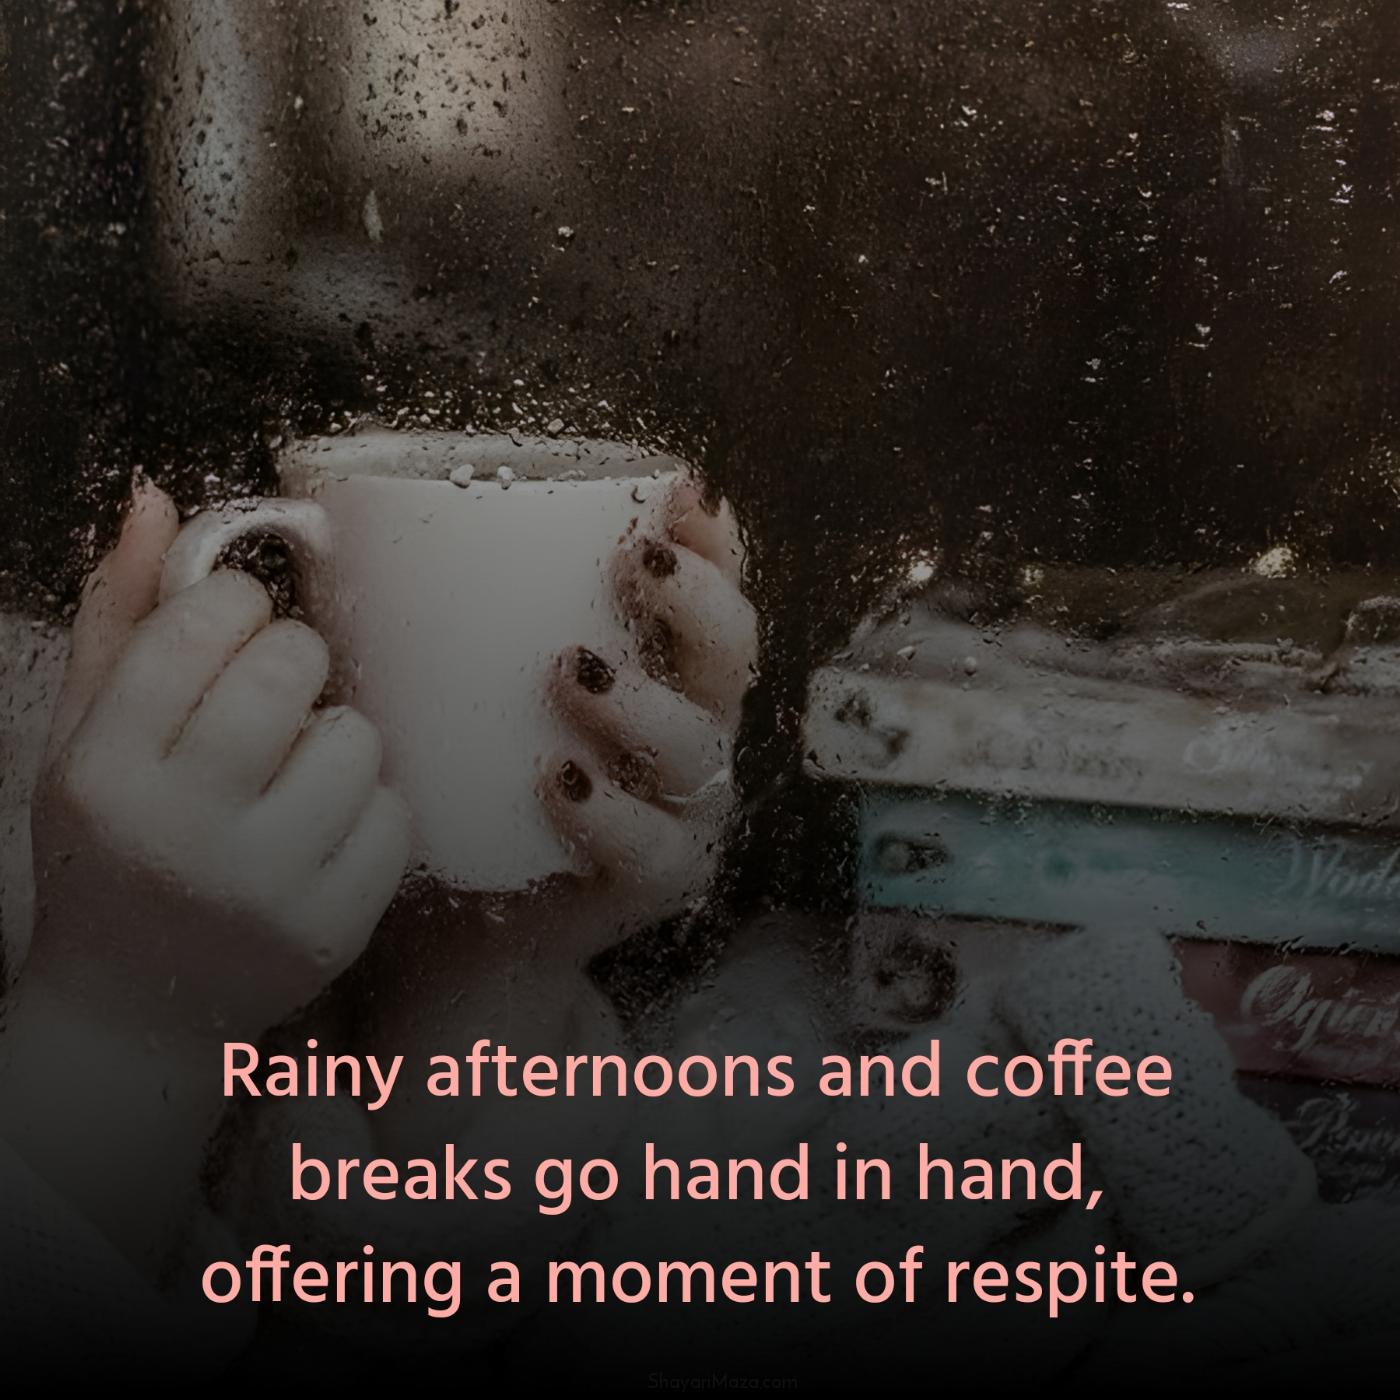 Rainy afternoons and coffee breaks go hand in hand